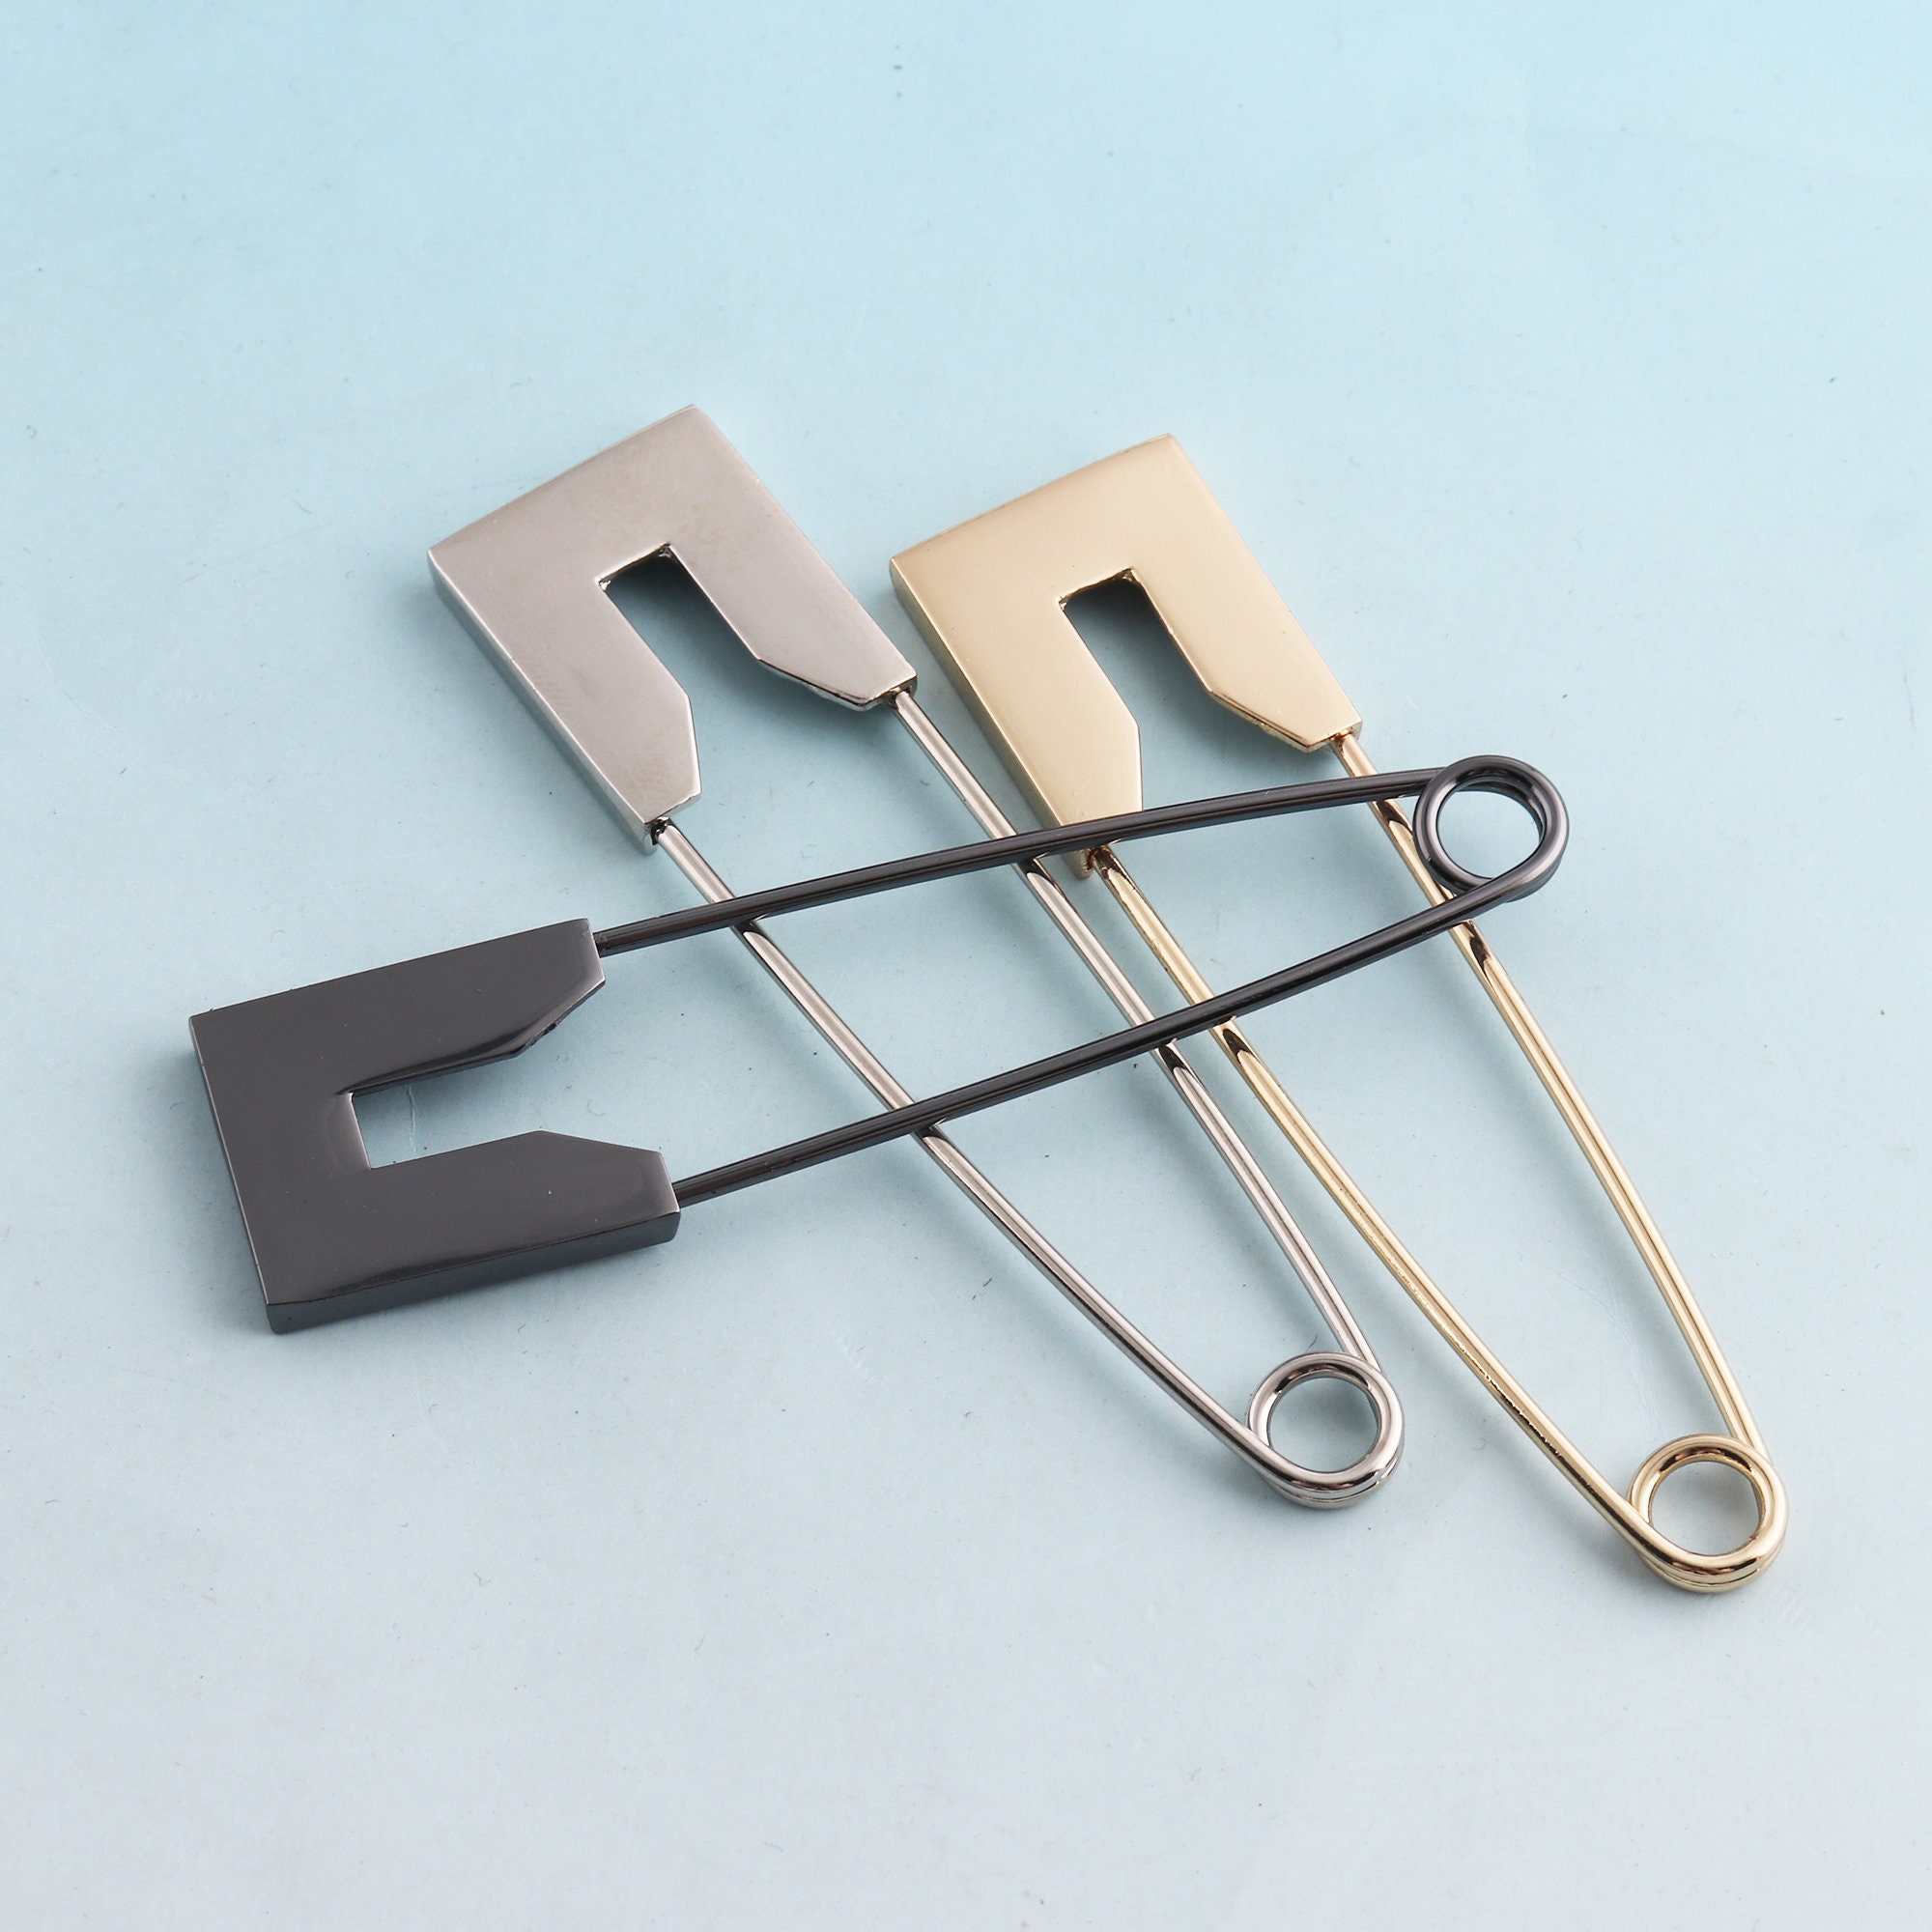 Large Safety Pins Strong Blanket Pins 86mm Sharp Jumbo Pins Gold&silver  Kilt Needle Brooch for Sewing Stitch Maker Knitted Fabric-6pcs 